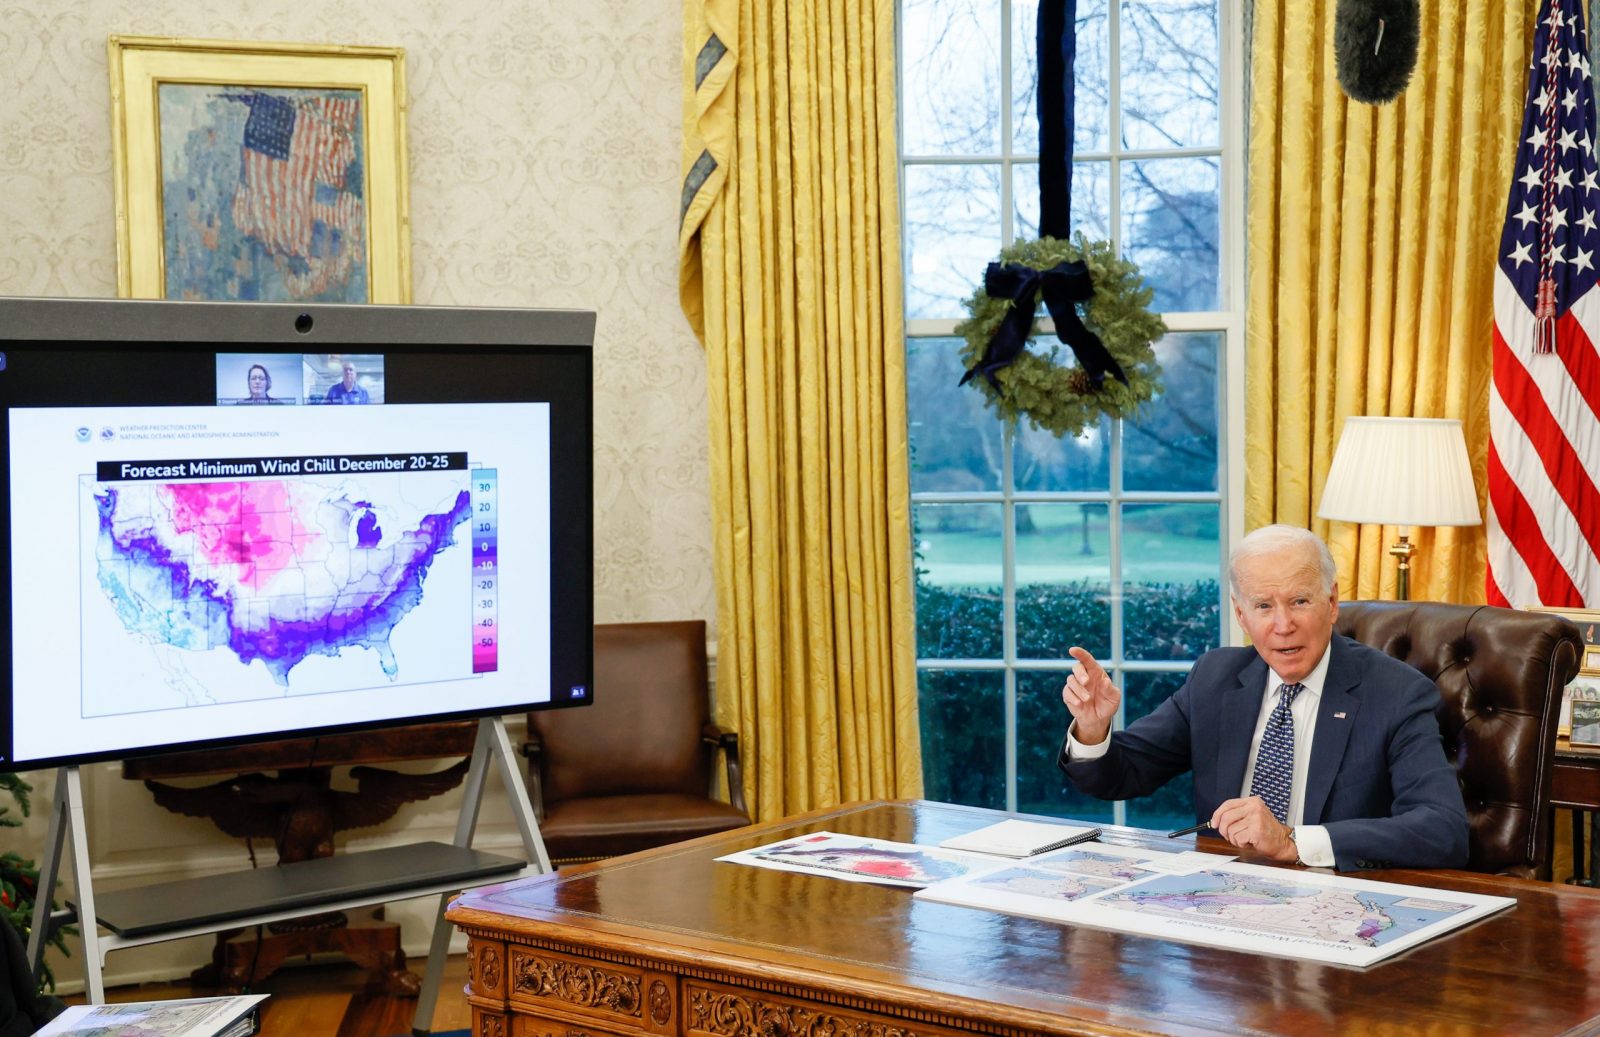 epa10376473 President Joe Biden issues warnings and travel advisories from the White House for the United States as a severe weather system threatens to impact most of the country in Washington D.C, USA, 22 December 2022. The weather system which is being called a 'Bomb Cyclone' threatens to disrupt travel and create life threatening conditions for large parts of the country over the December 25th Christmas Weekend.  EPA/Jemal Countess / POOL